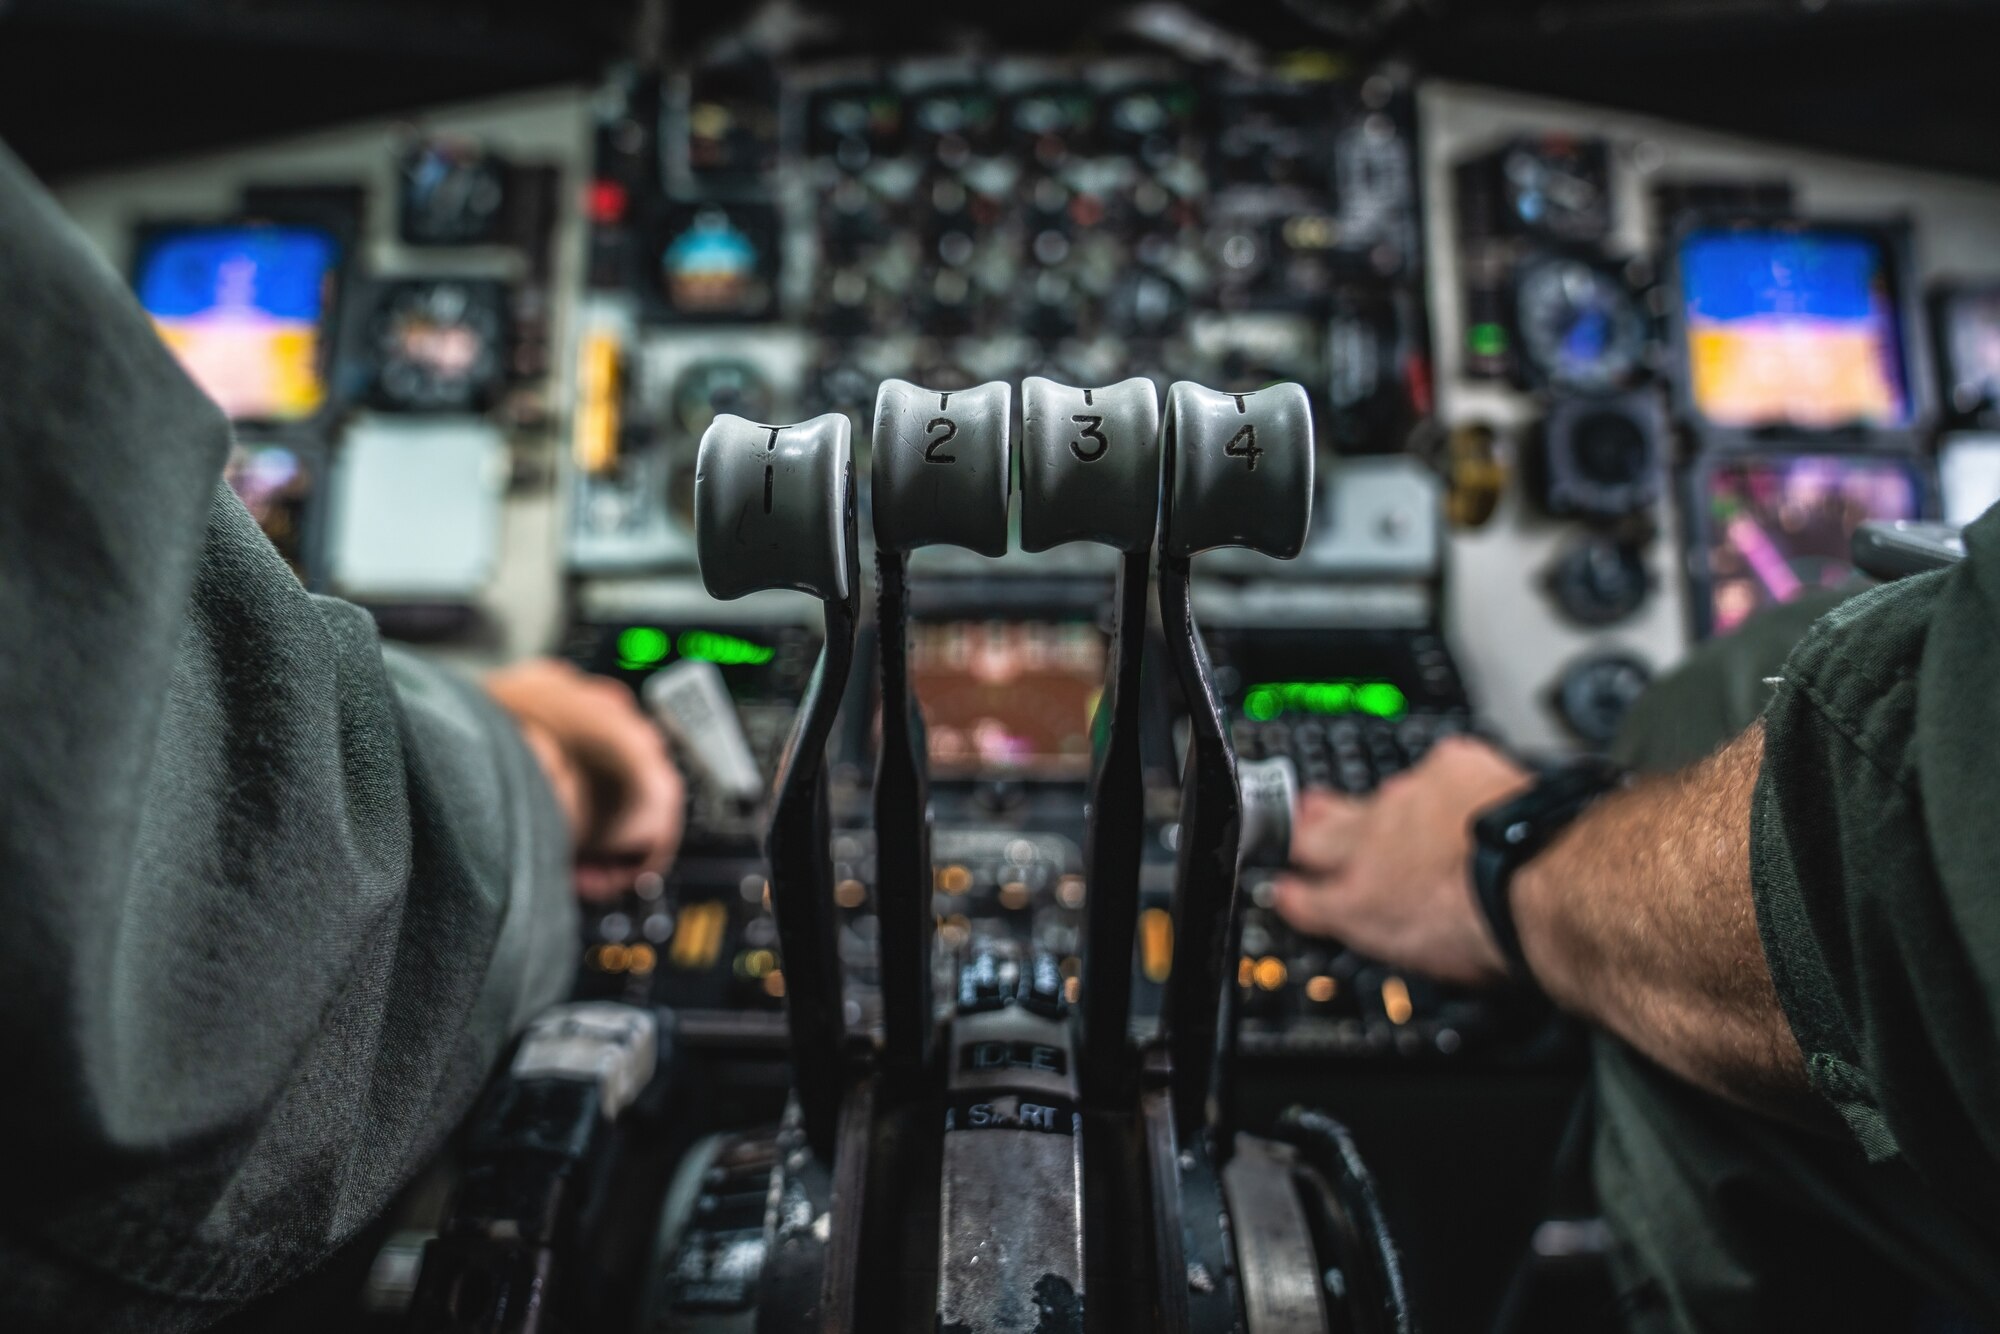 U.S. Air Force Capt. Andrew Bragado, left, and Capt. Jaymes Trimble, right, pilots assigned to the 50th Air Refueling Squadron, prepare to take off on a flight during the 6th Air Refueling Wing’s Agile Combat Employment capstone exercise at Joint Base Charleston, South Carolina, Aug. 23, 2022.